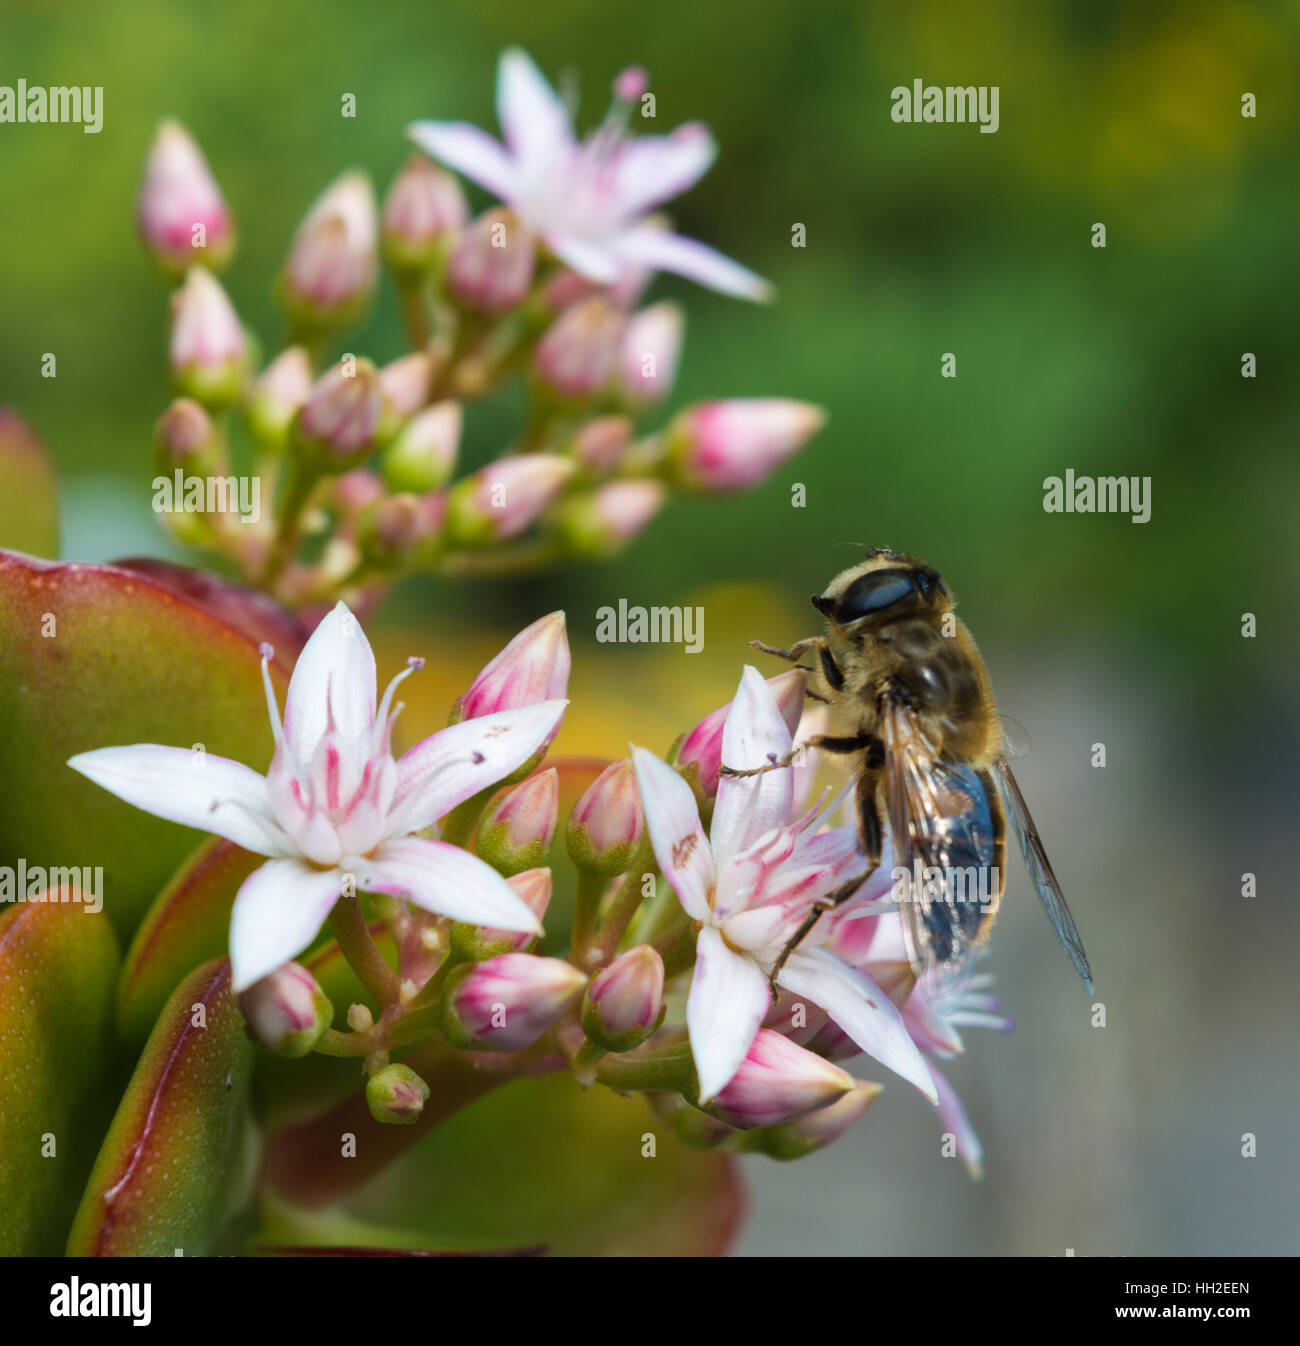 Honeybee Perched on a Jade Plant Stock Photo